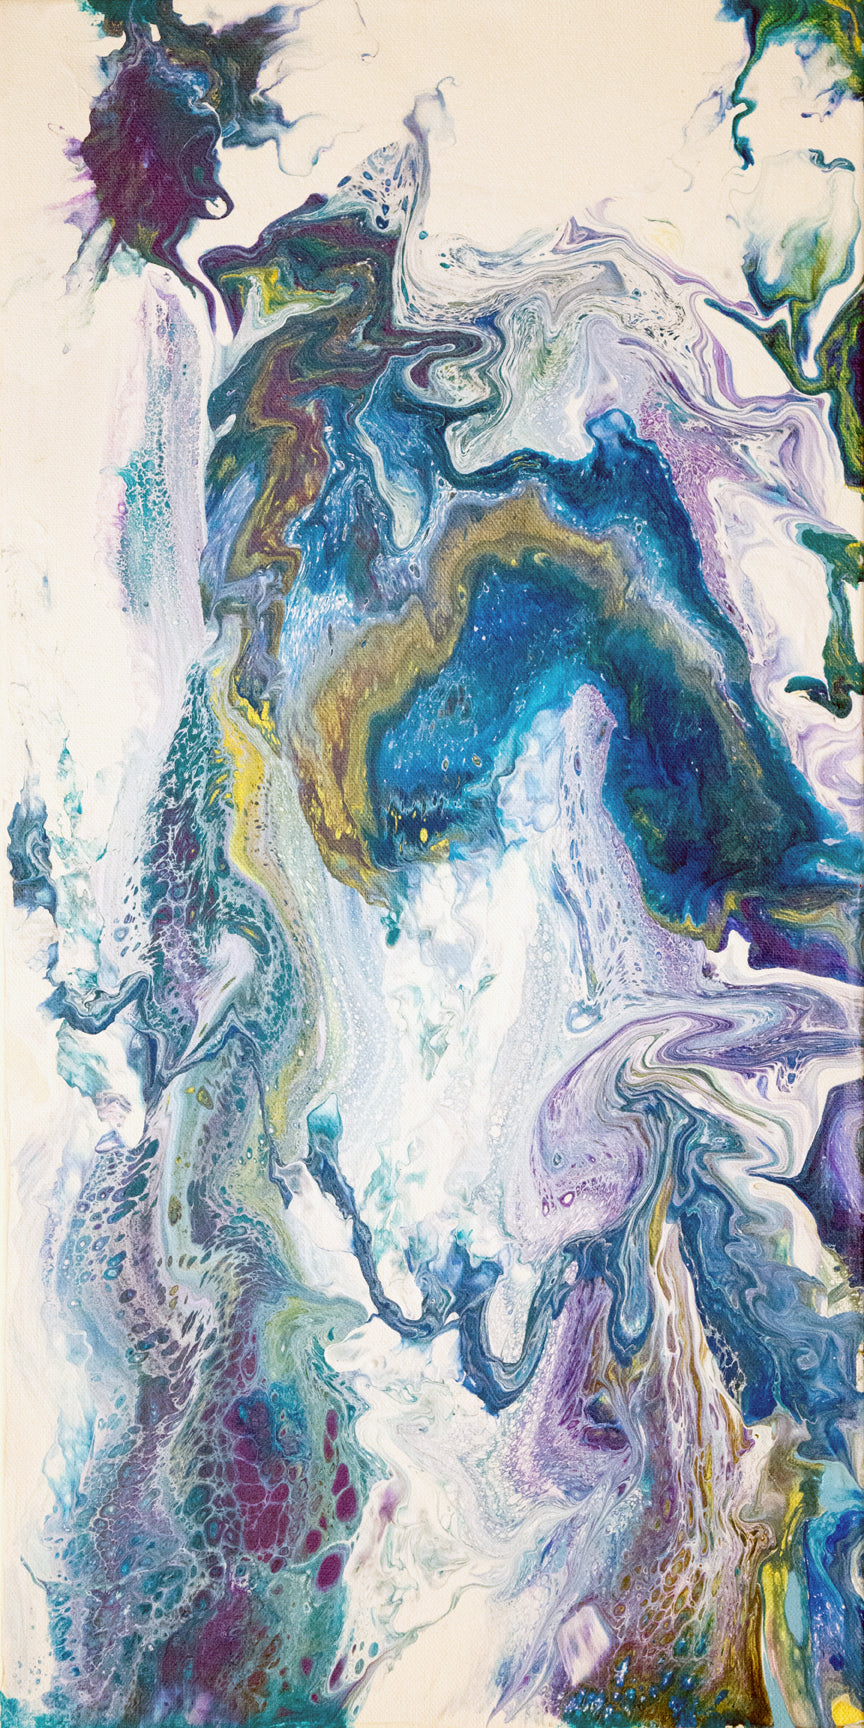 abstract fluid acrylic painting with texture and vibrant blue colors